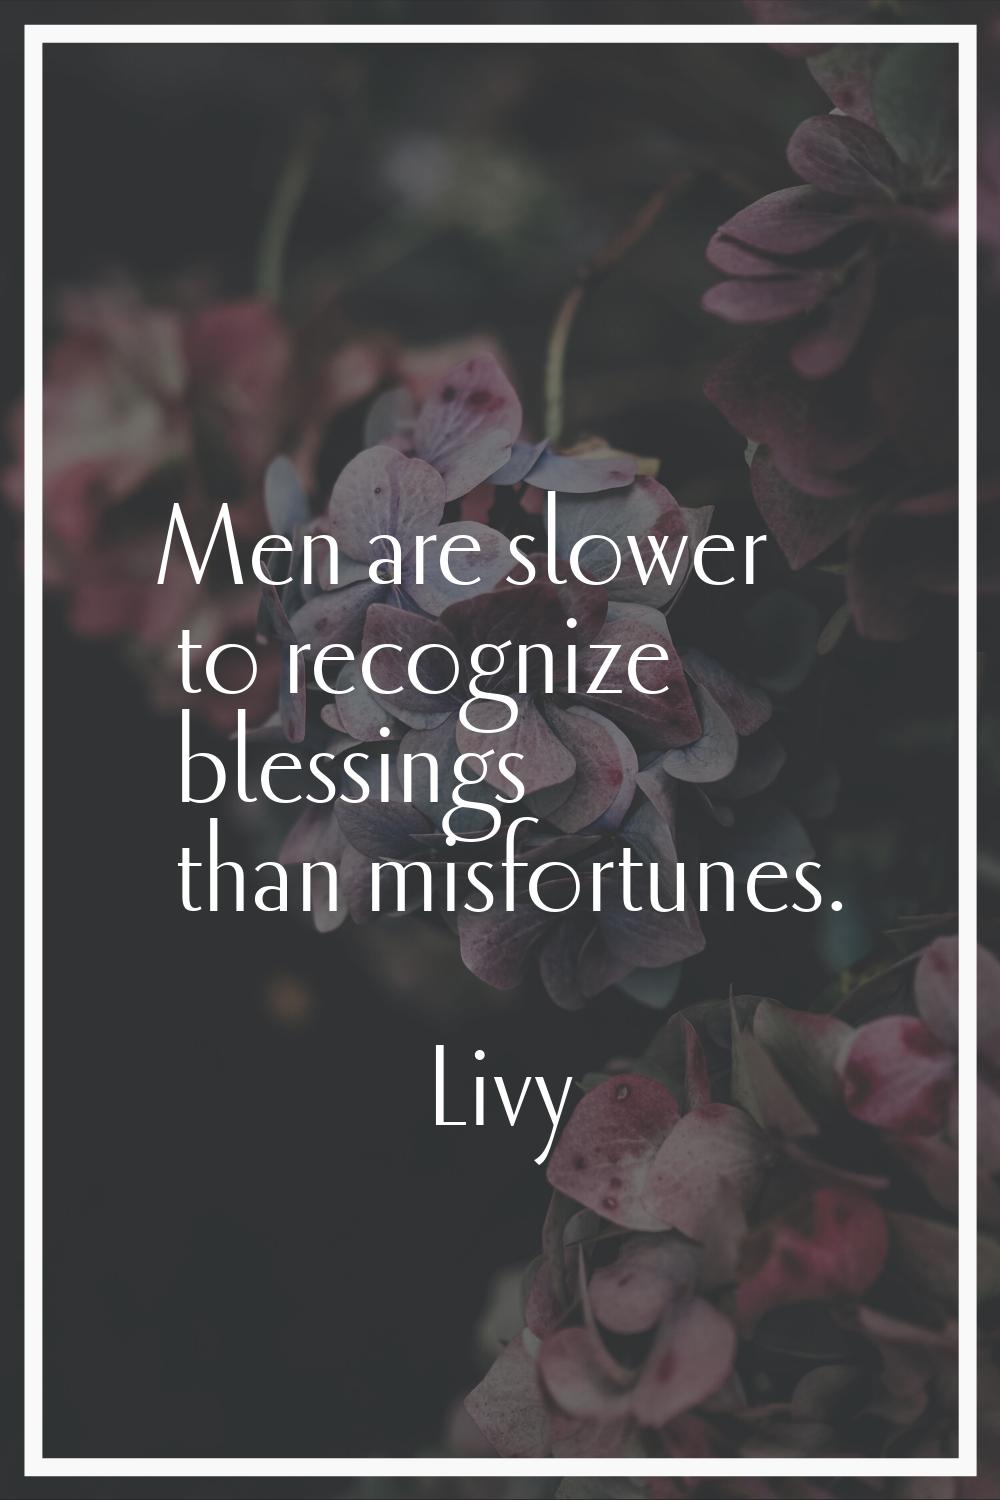 Men are slower to recognize blessings than misfortunes.